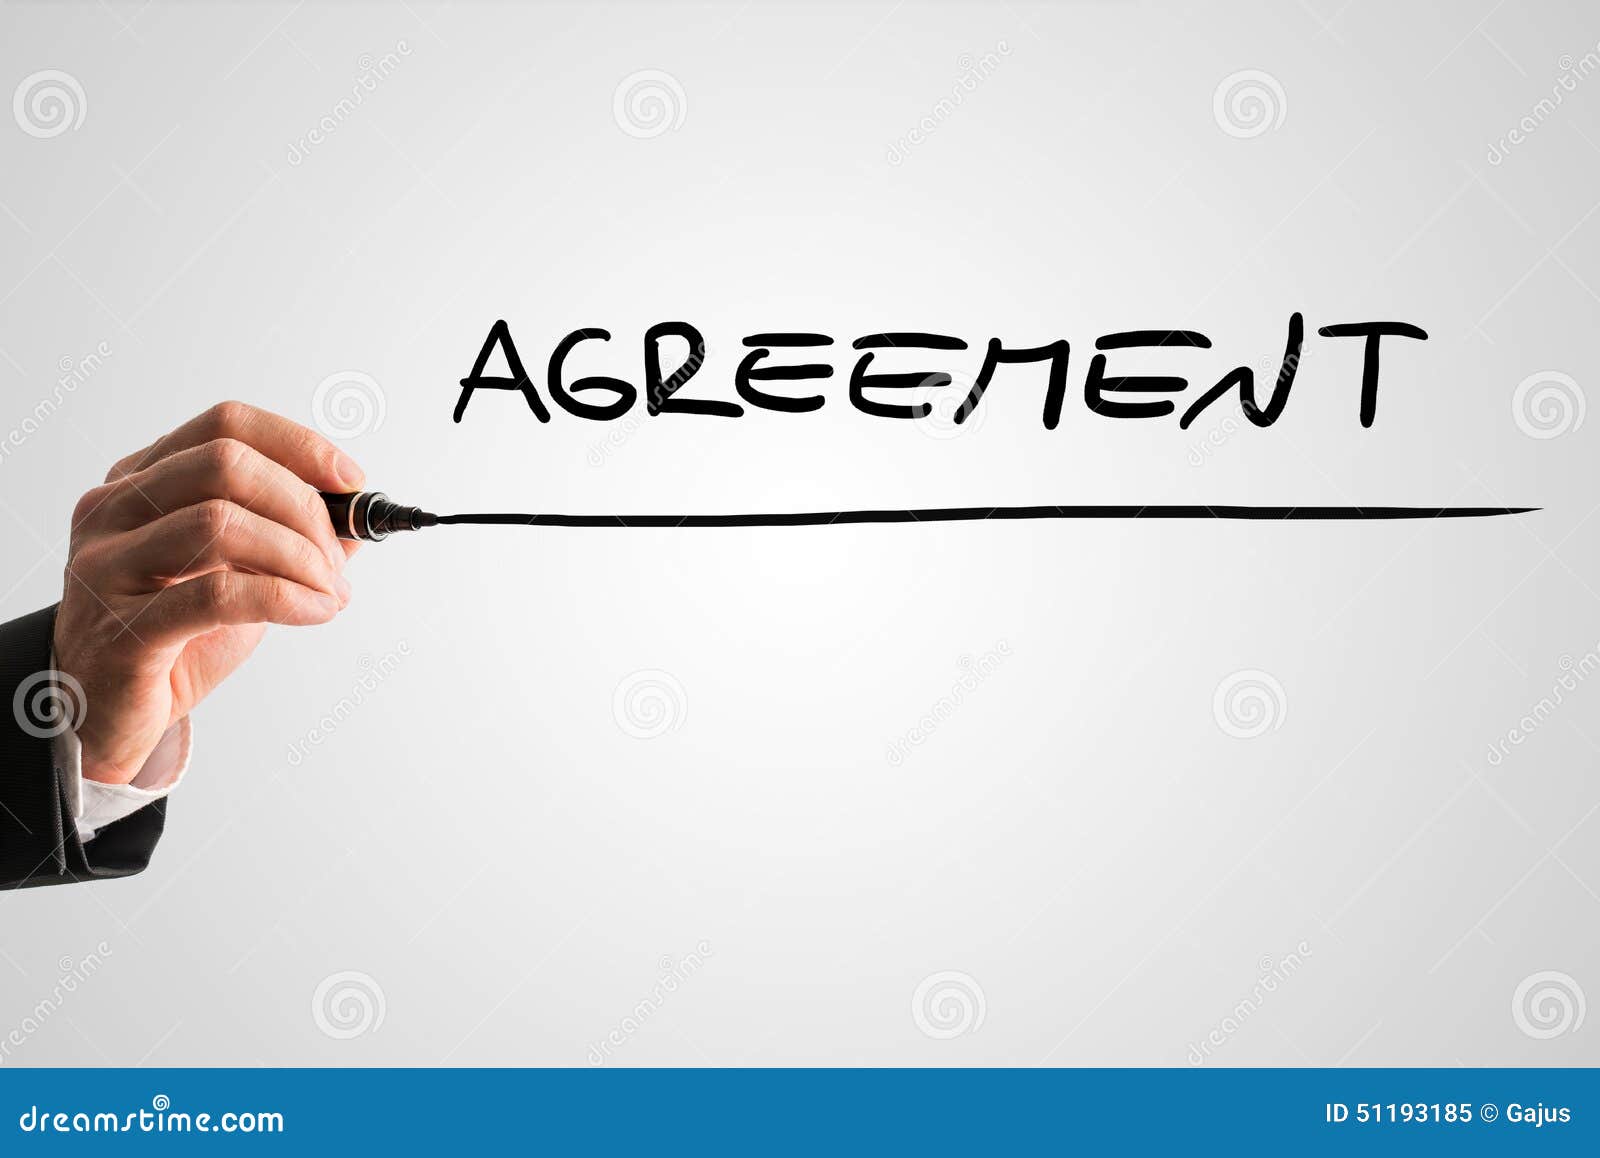 conceptual image with the word agreement